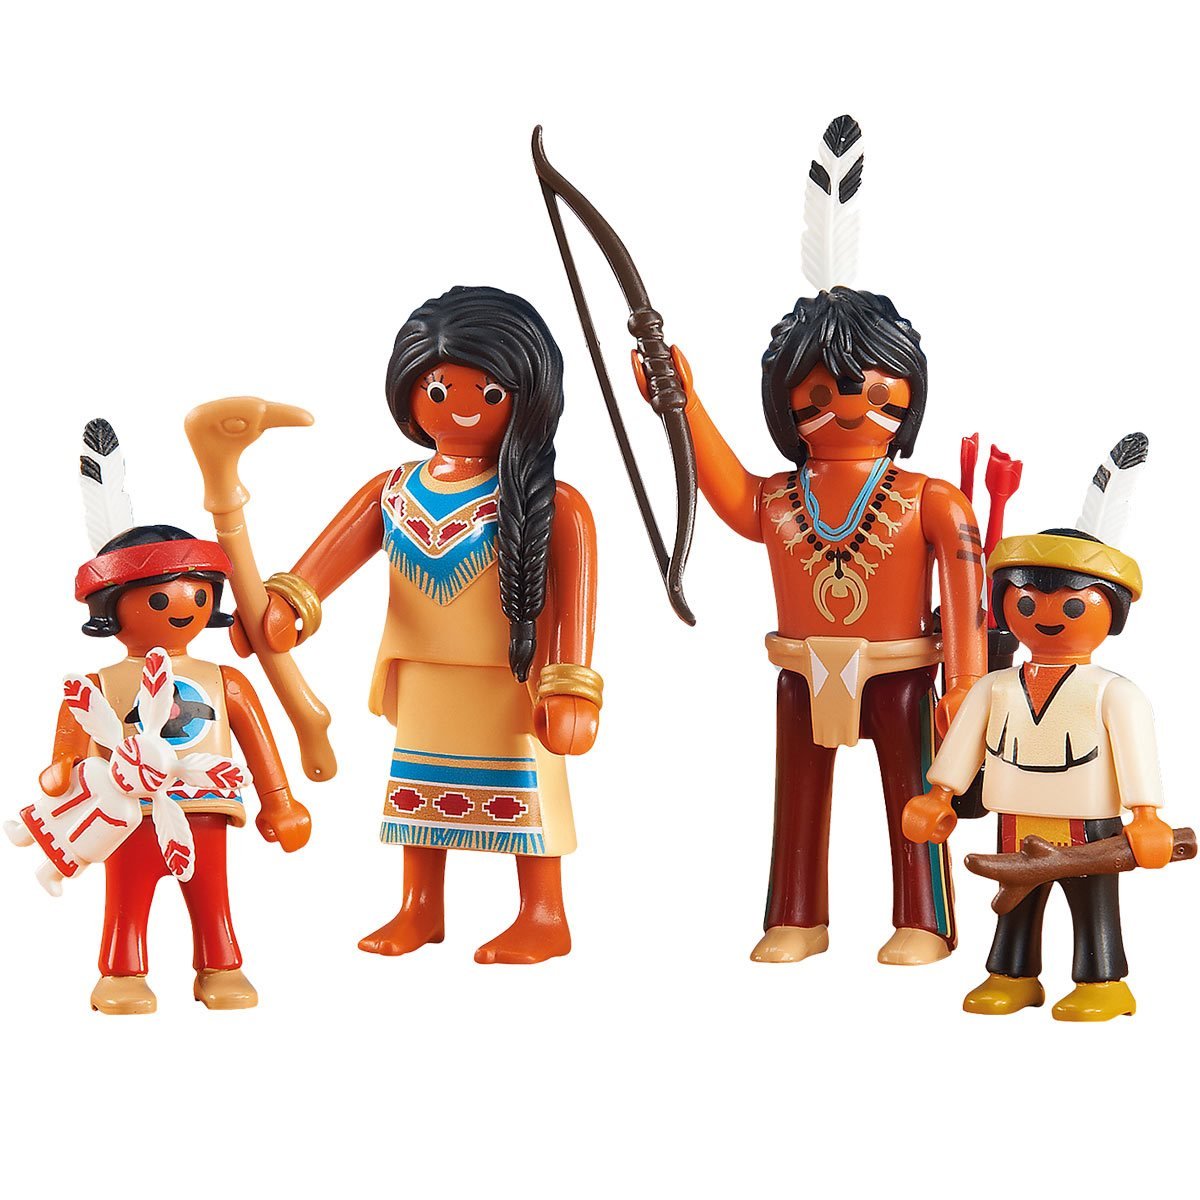 Playmobil 6322 Western American Family Action Figures